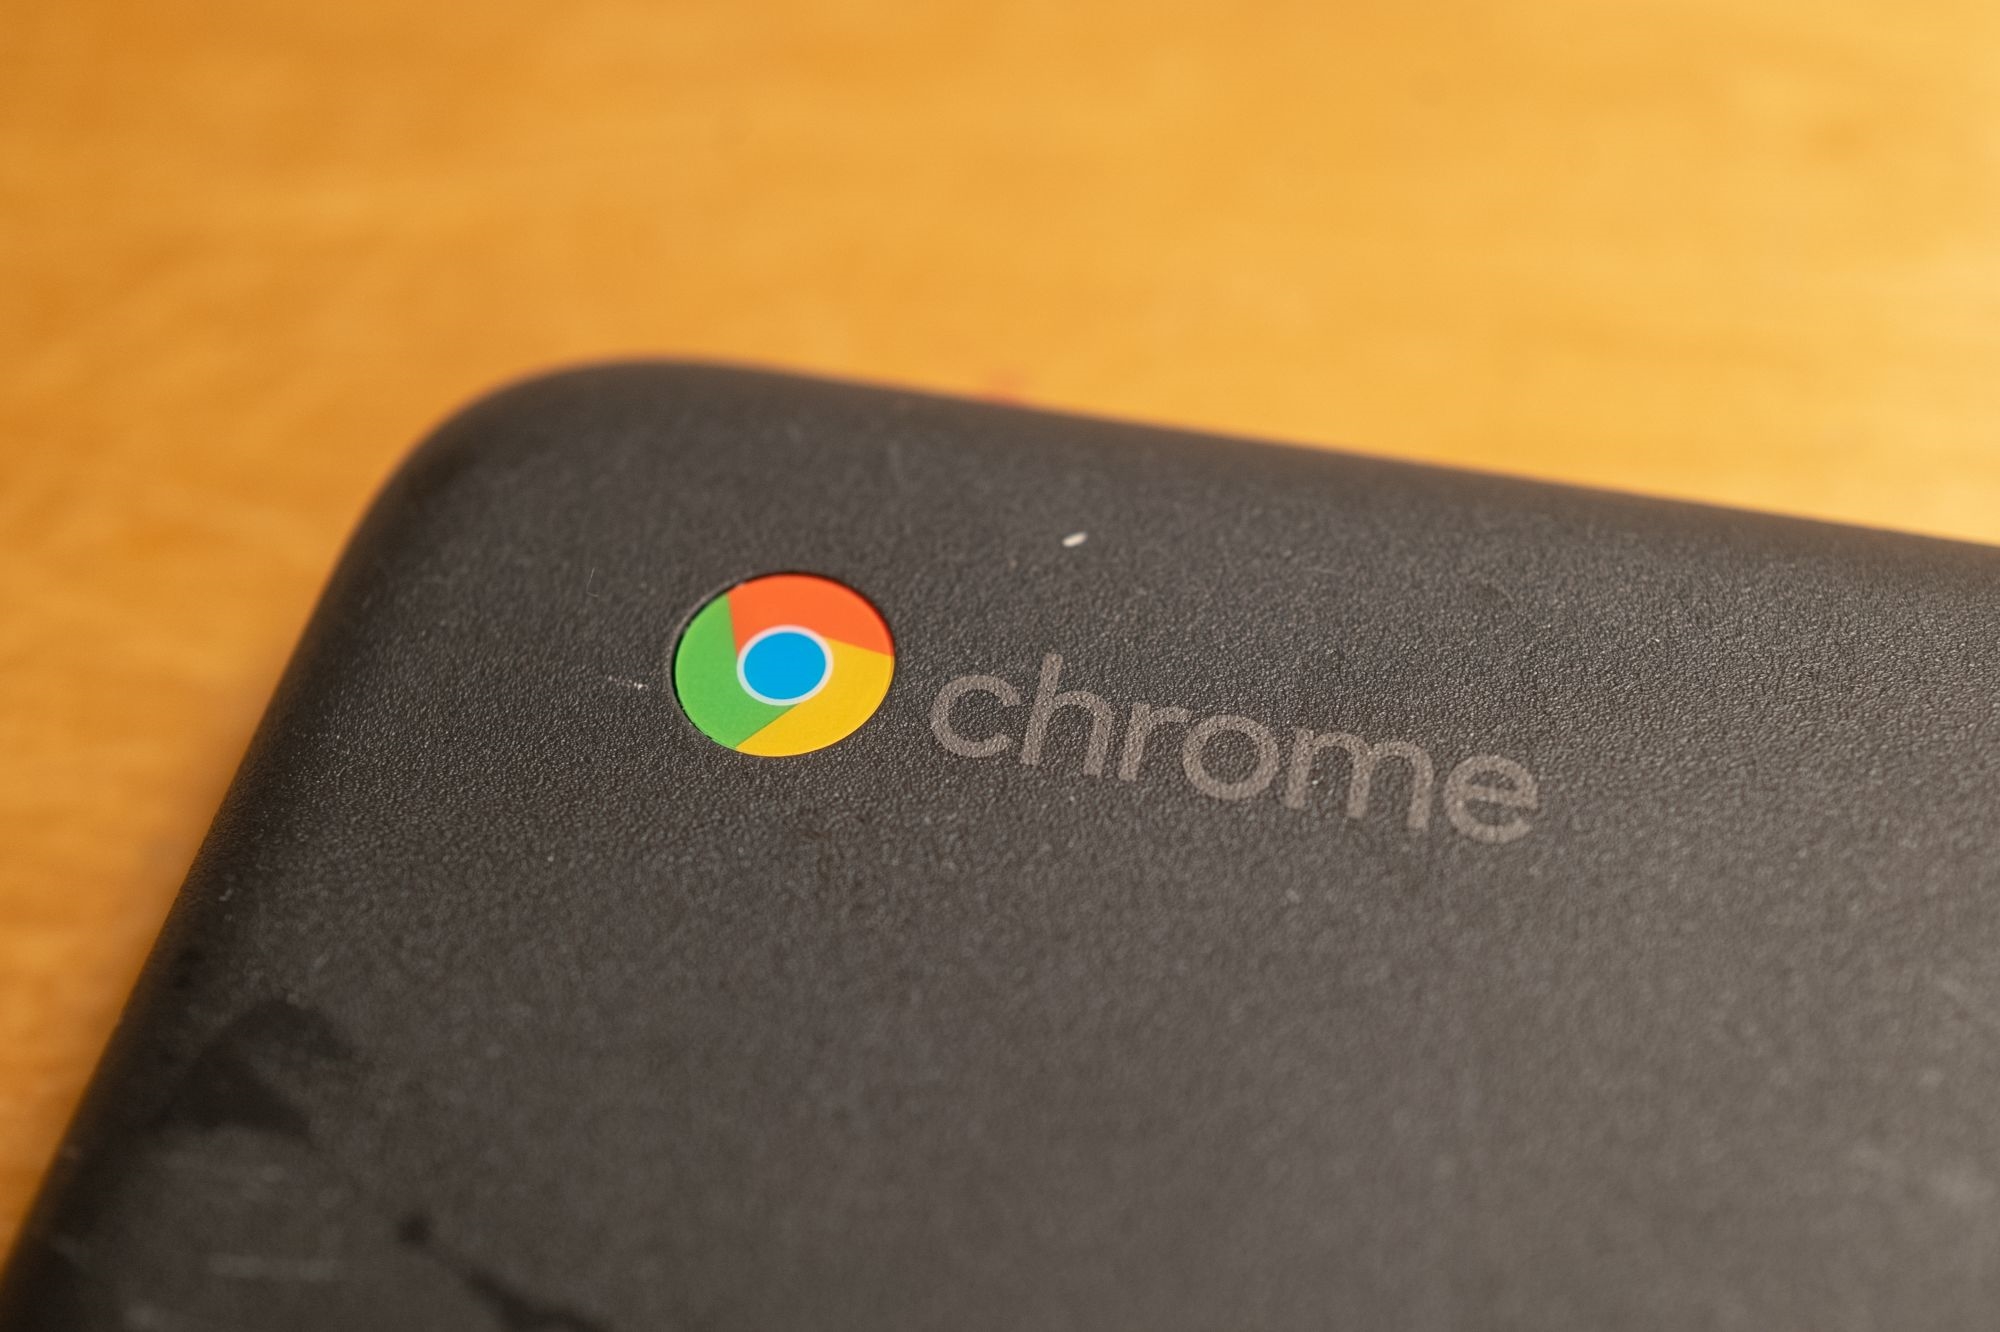 Gesture navigation is coming to Chrome OS | DeviceDaily.com